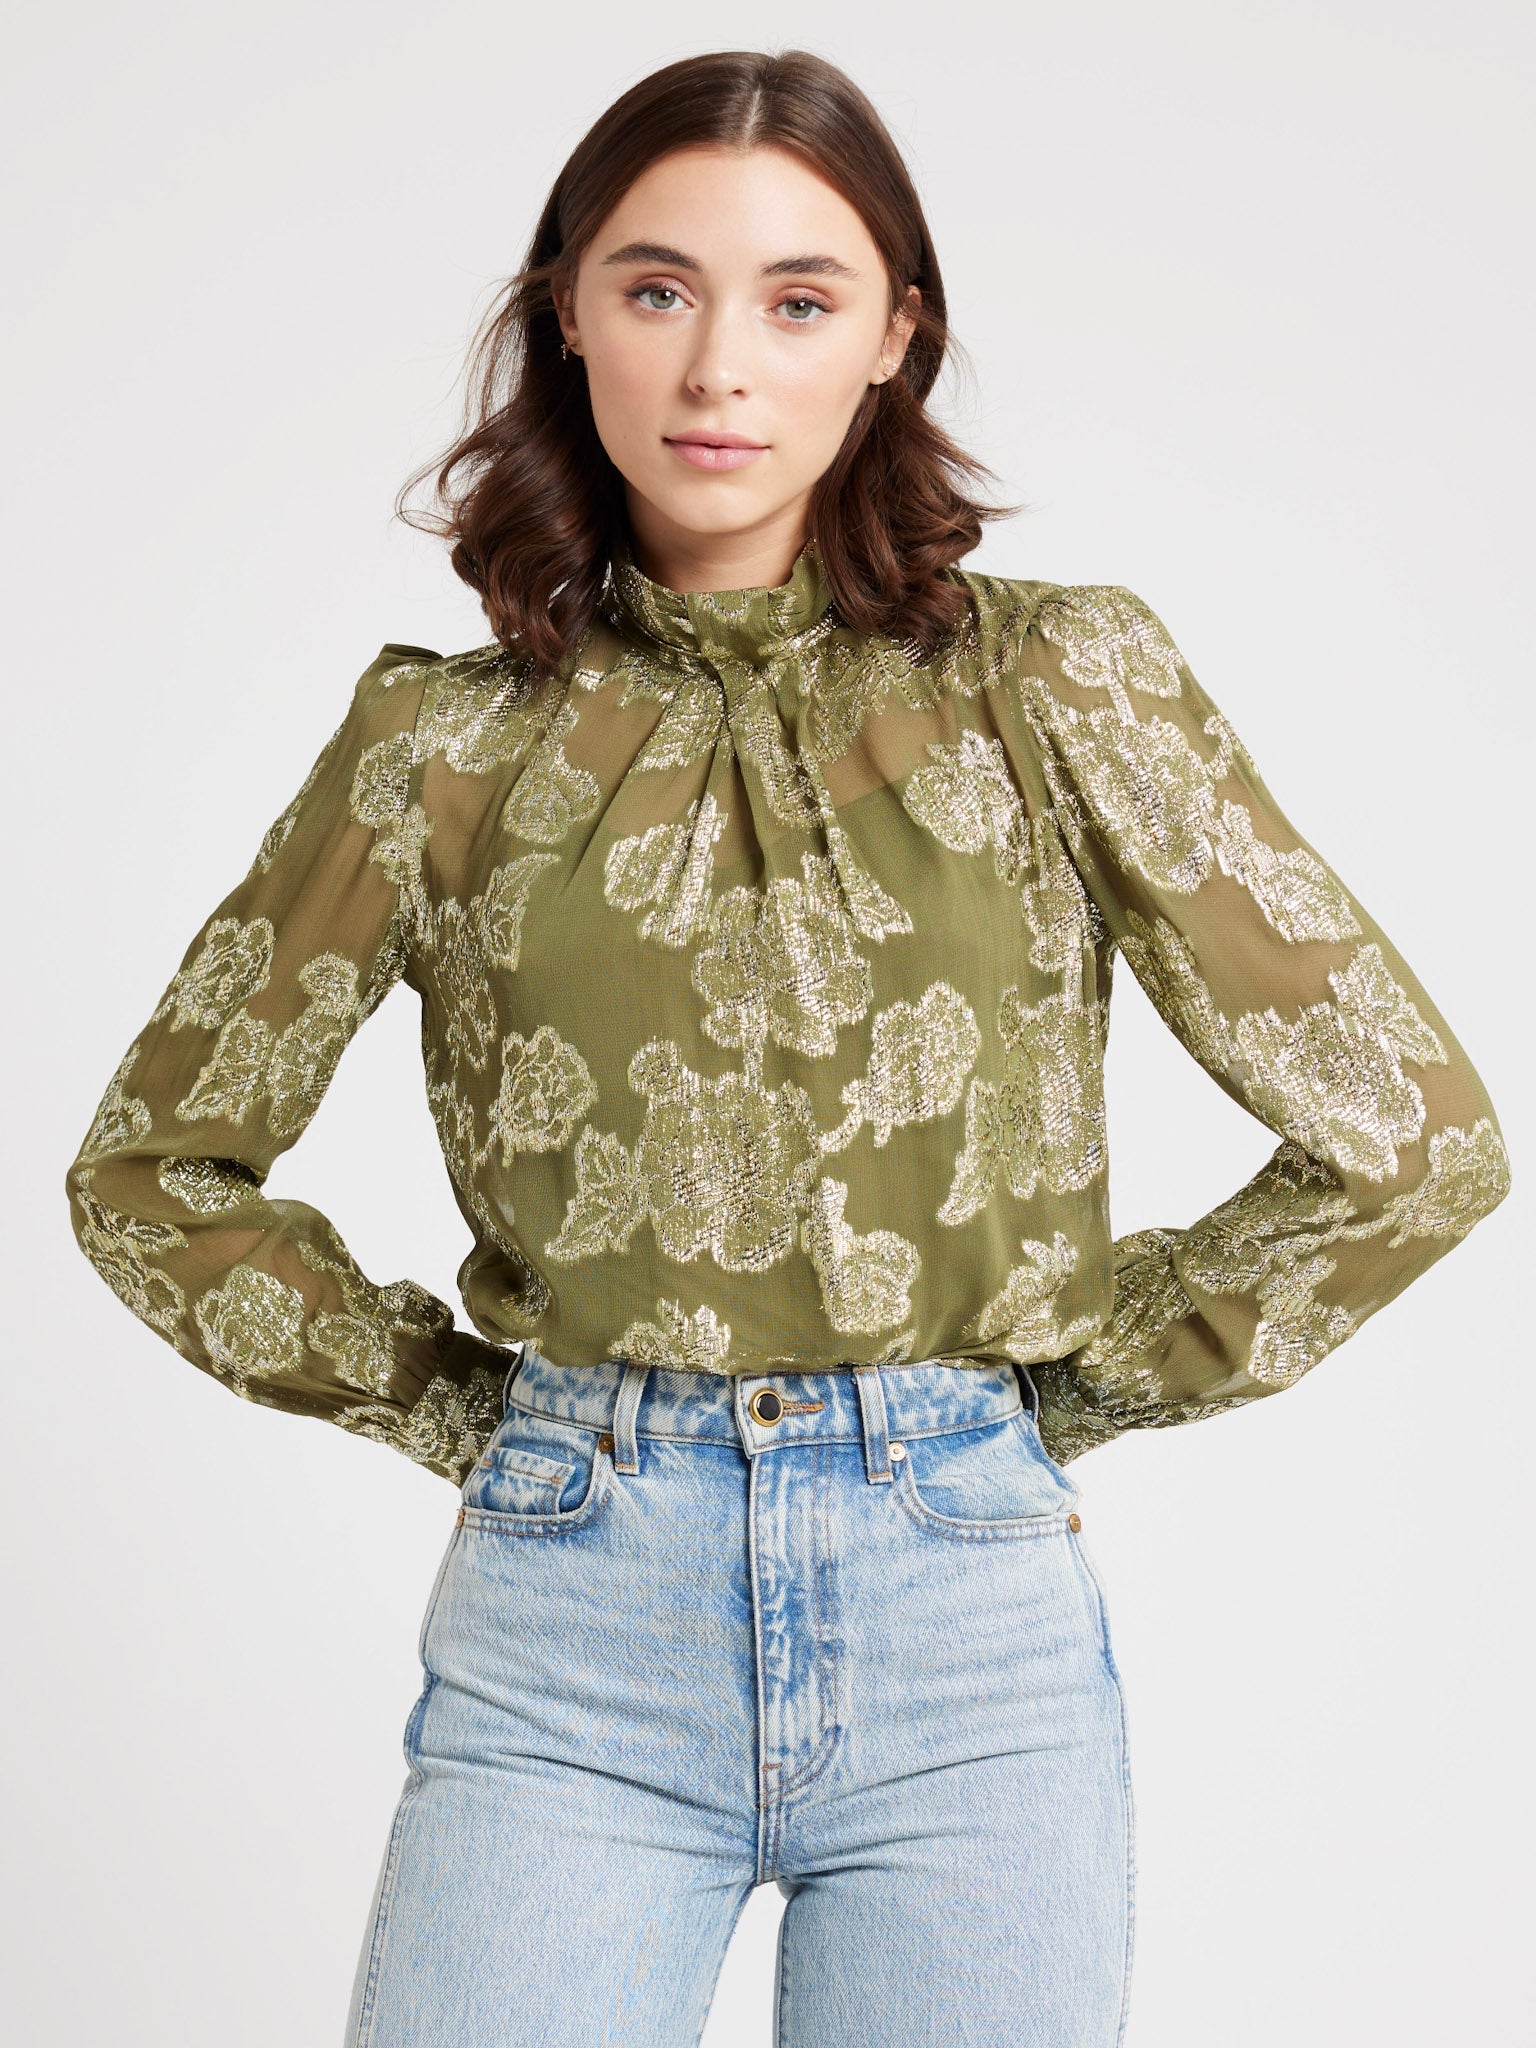 MILLE Clothing Charlotte Top in Gold Leaf